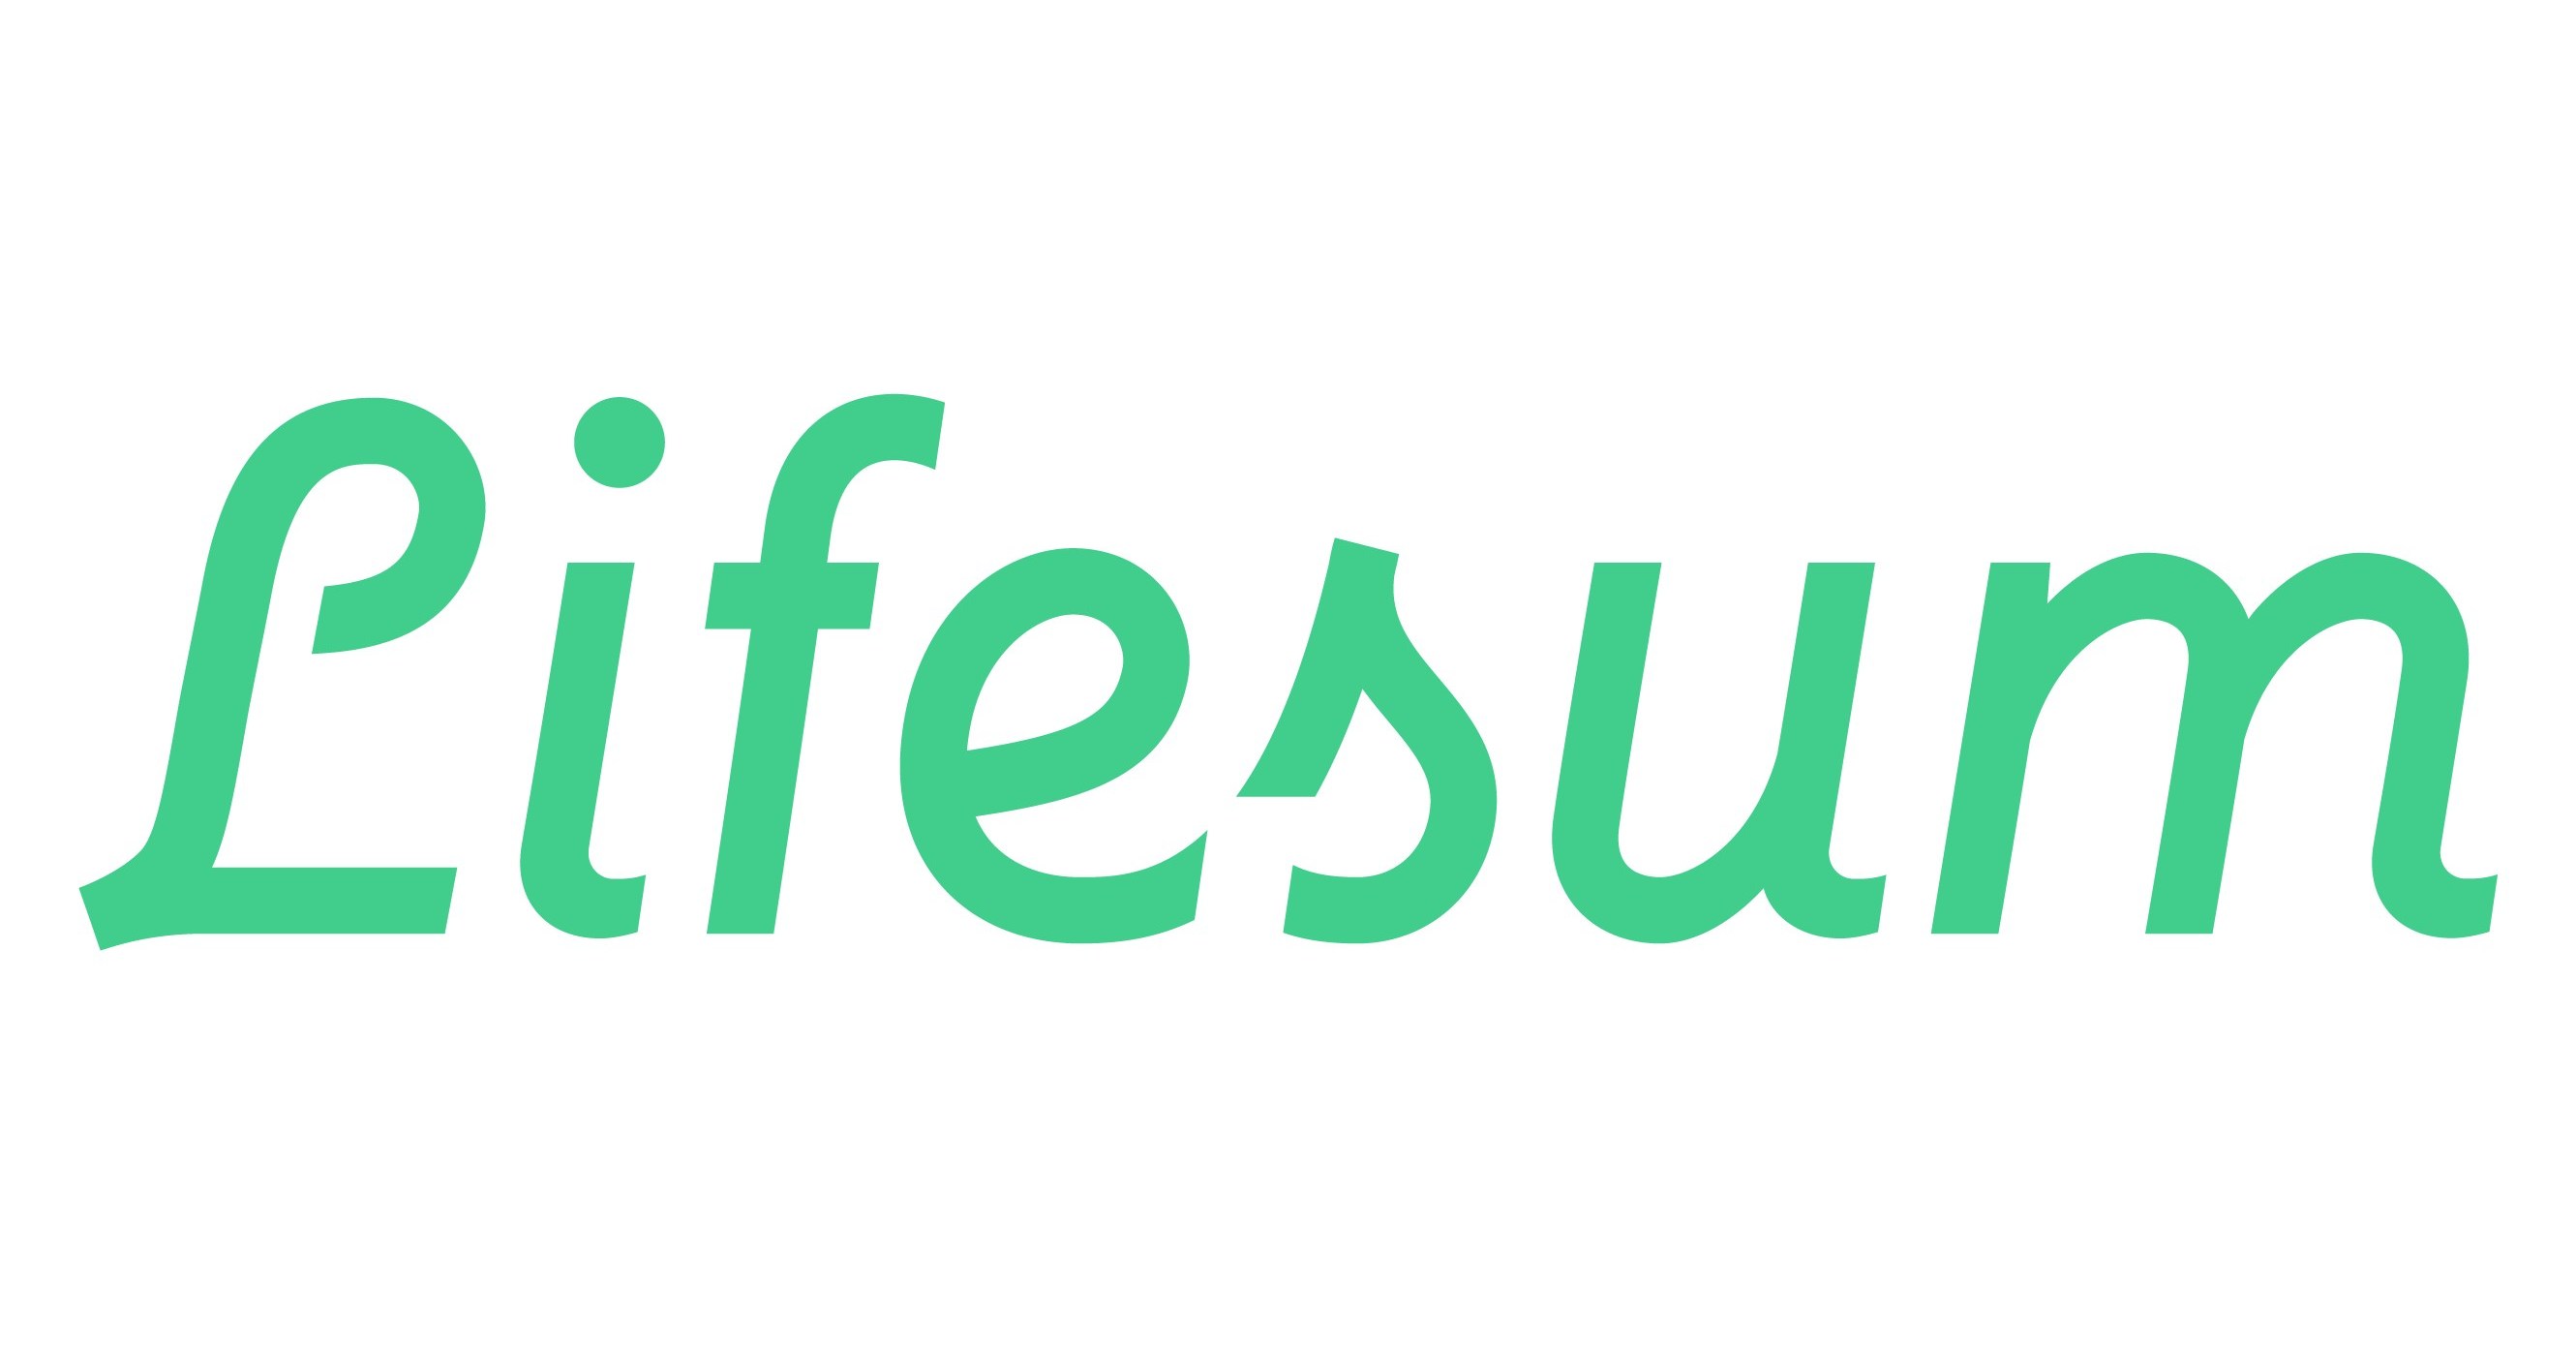 Lifesum reveals that eating a Climatarian diet is the equivalent of removing 85 million cars off the roads